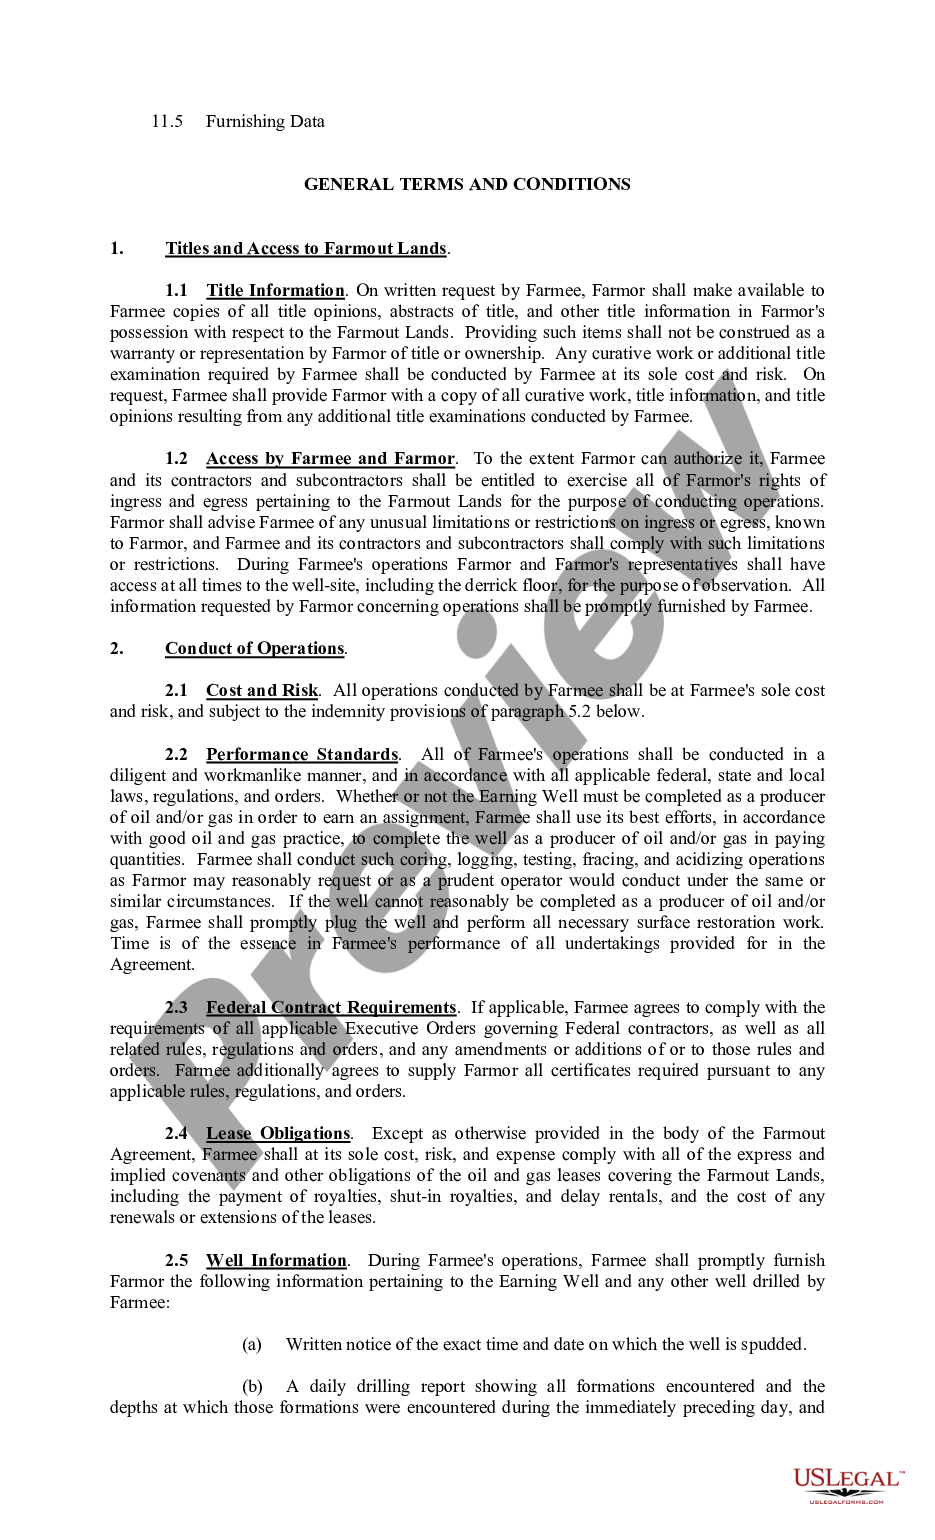 page 6 Farmout Agreement Providing For Multiple Wells with Production Required to Earn An Assignment preview